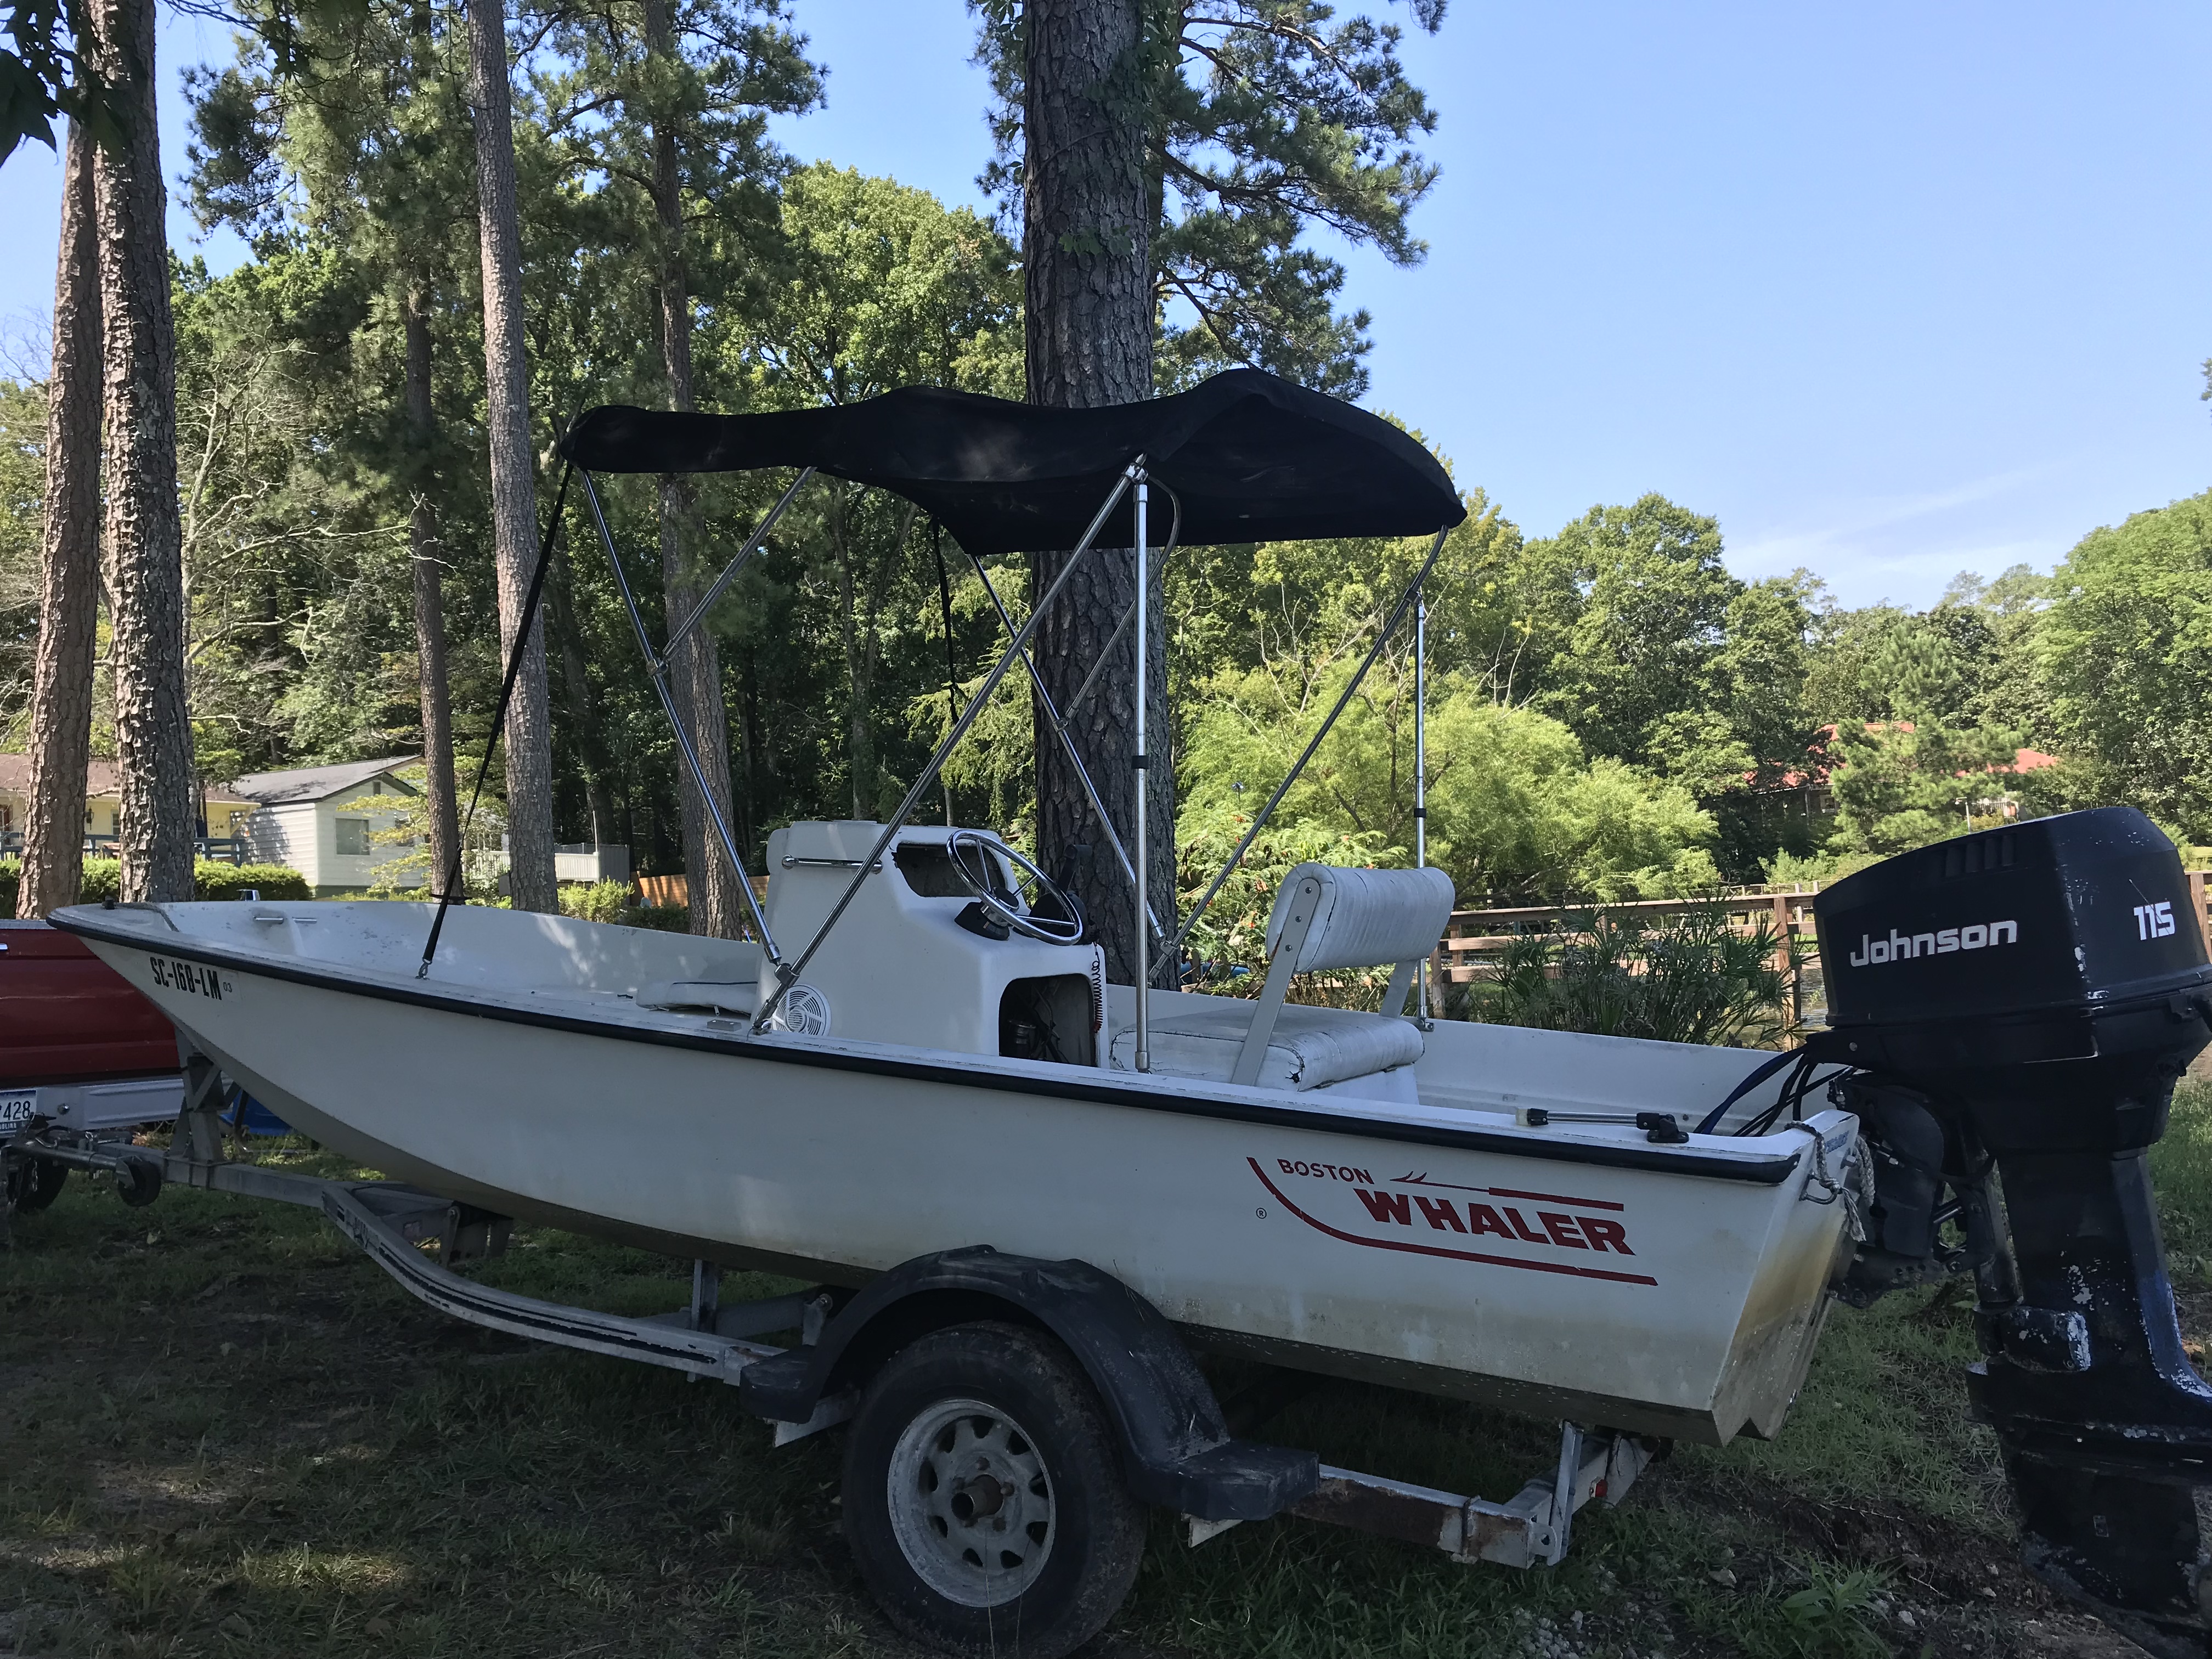 1977 17 foot Boston Whaler Newport Power boat for sale in Chapin, SC - image 8 